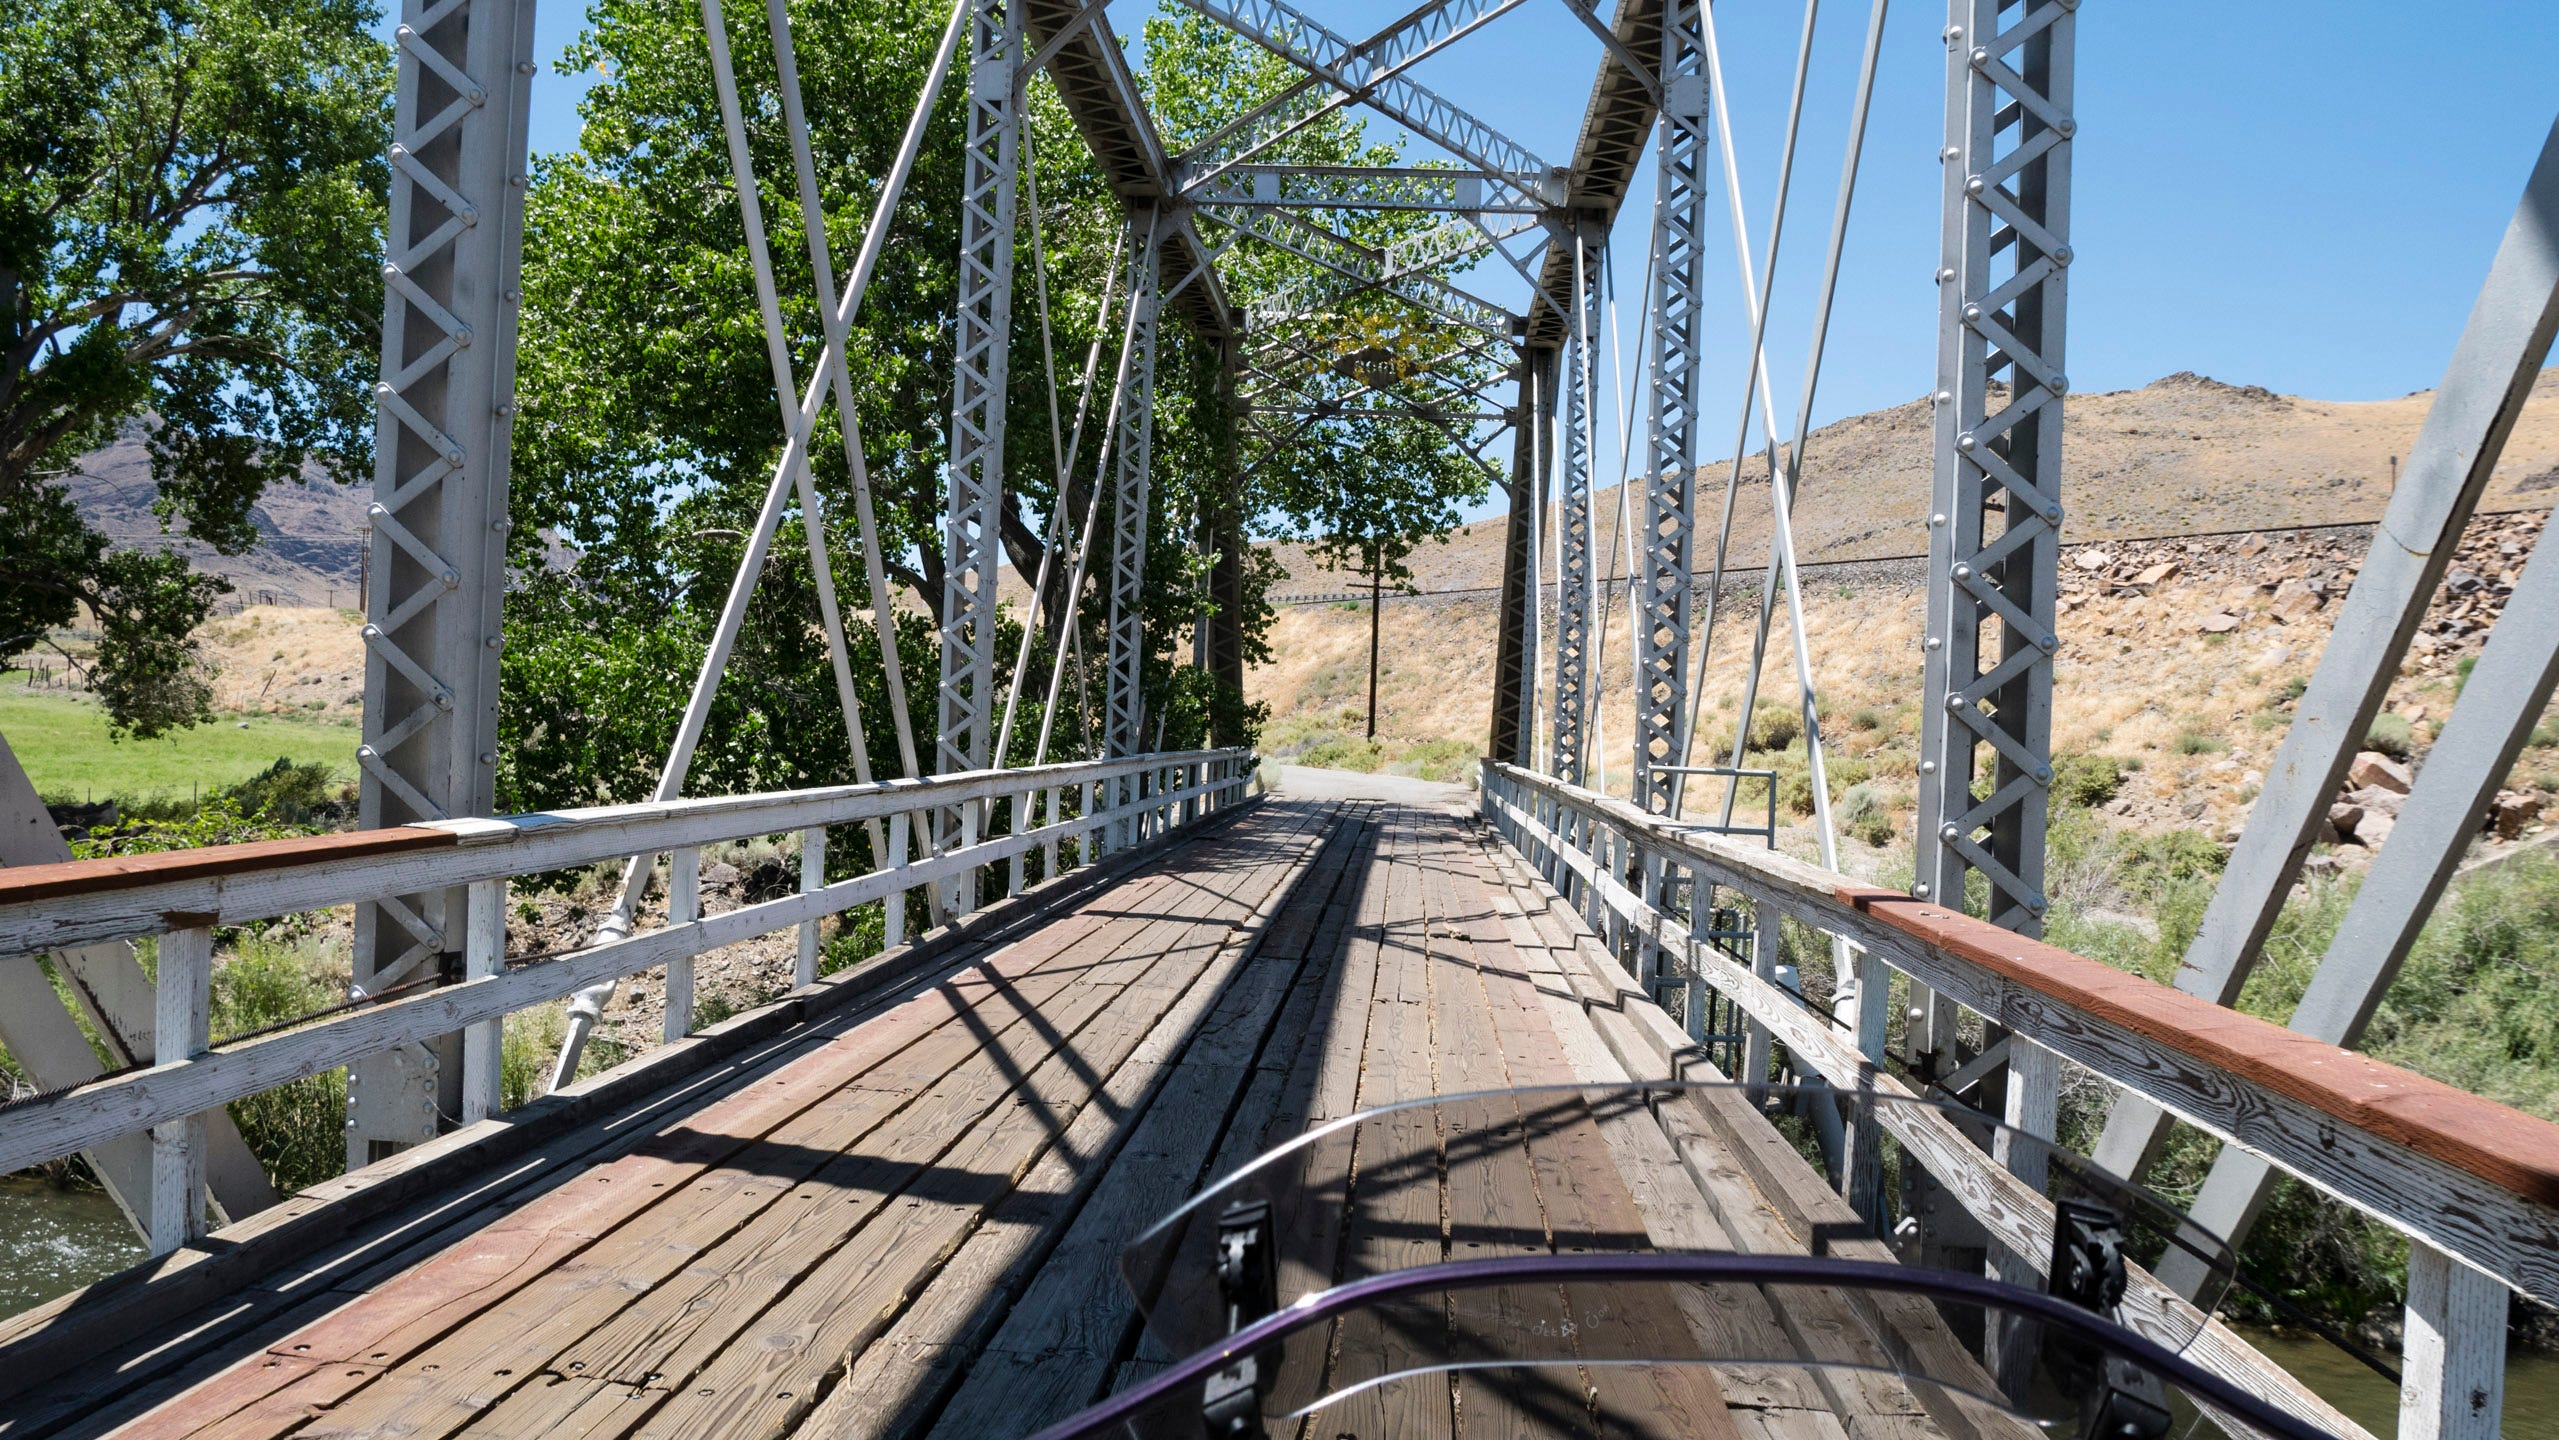 Photo taken from the seat of a motorcycle of the bike crossing an old, single-lane wooden-decked truss bridge. The vertical columns and diagonal braces of the bridge fill the frame and cast strong shadows onto the bridge deck. To the left, leafy, green trees grow alongside the river that the bridge is crossing. Beyond, is a green, grassy field and then dry, arid desert. To the right, elevated above the roadway, the level bed and rail of a railroad track can be seen. Beyond that, a naked, rounded hill. Straight ahead is the end of the bridge. The road bends to the left. A single telephone pole can be seen on the side of the road.